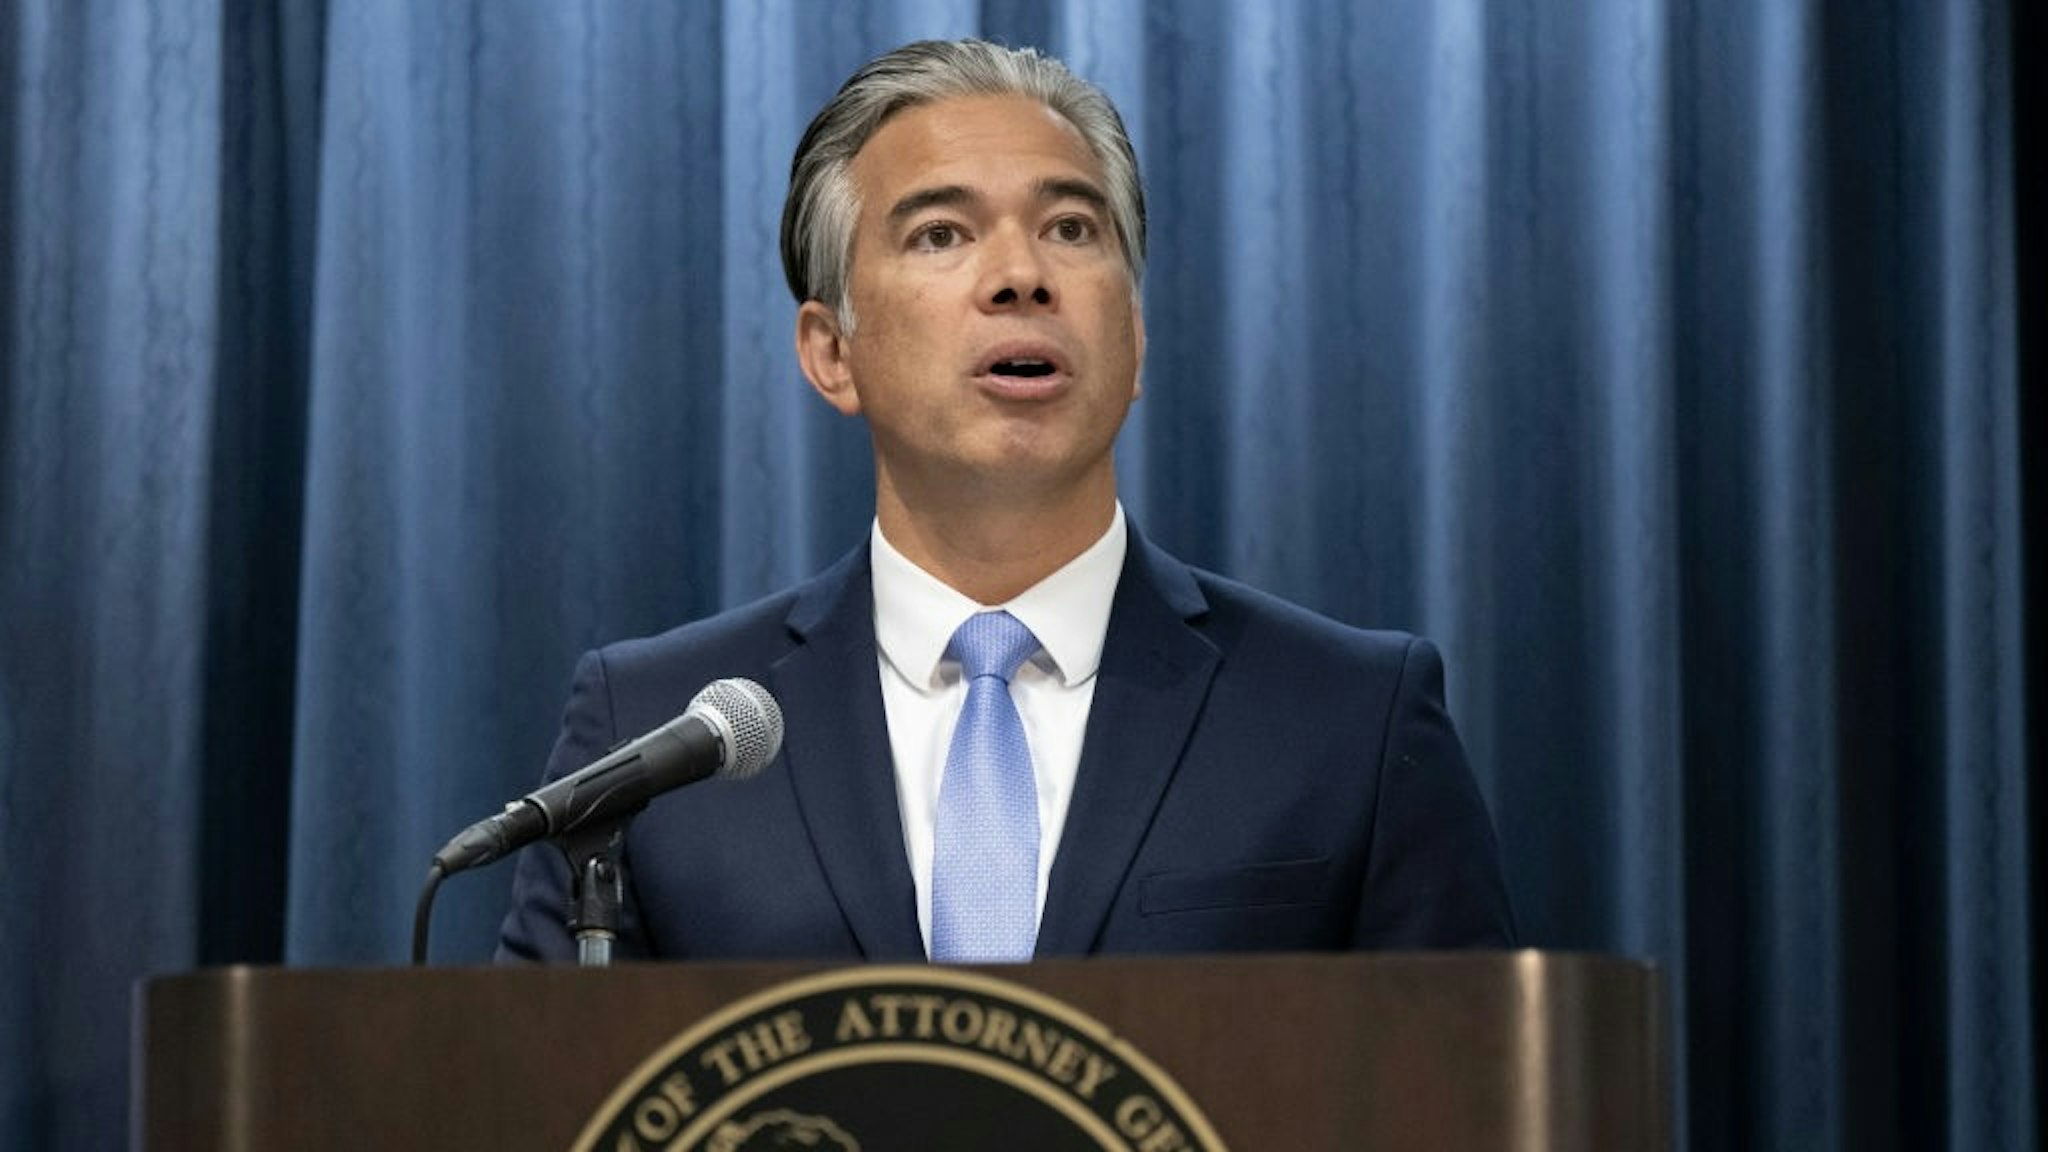 California Attorney General Rob Bonta speaks during a press conference in Los Angeles... Los Angeles, CA - October 12: California Attorney General Rob Bonta speaks during a press conference in Los Angeles on recent significant fentanyl enforcement actions by the California Department of Justice. Bonta also confirmed that his office has launched an investigation into the City of Los Angeles redistricting after a recent racist incident among city council members. (Photo by Hans Gutknecht/MediaNews Group/Los Angeles Daily News via Getty Images) MediaNews Group/Los Angeles Daily News via Getty Images / Contributor